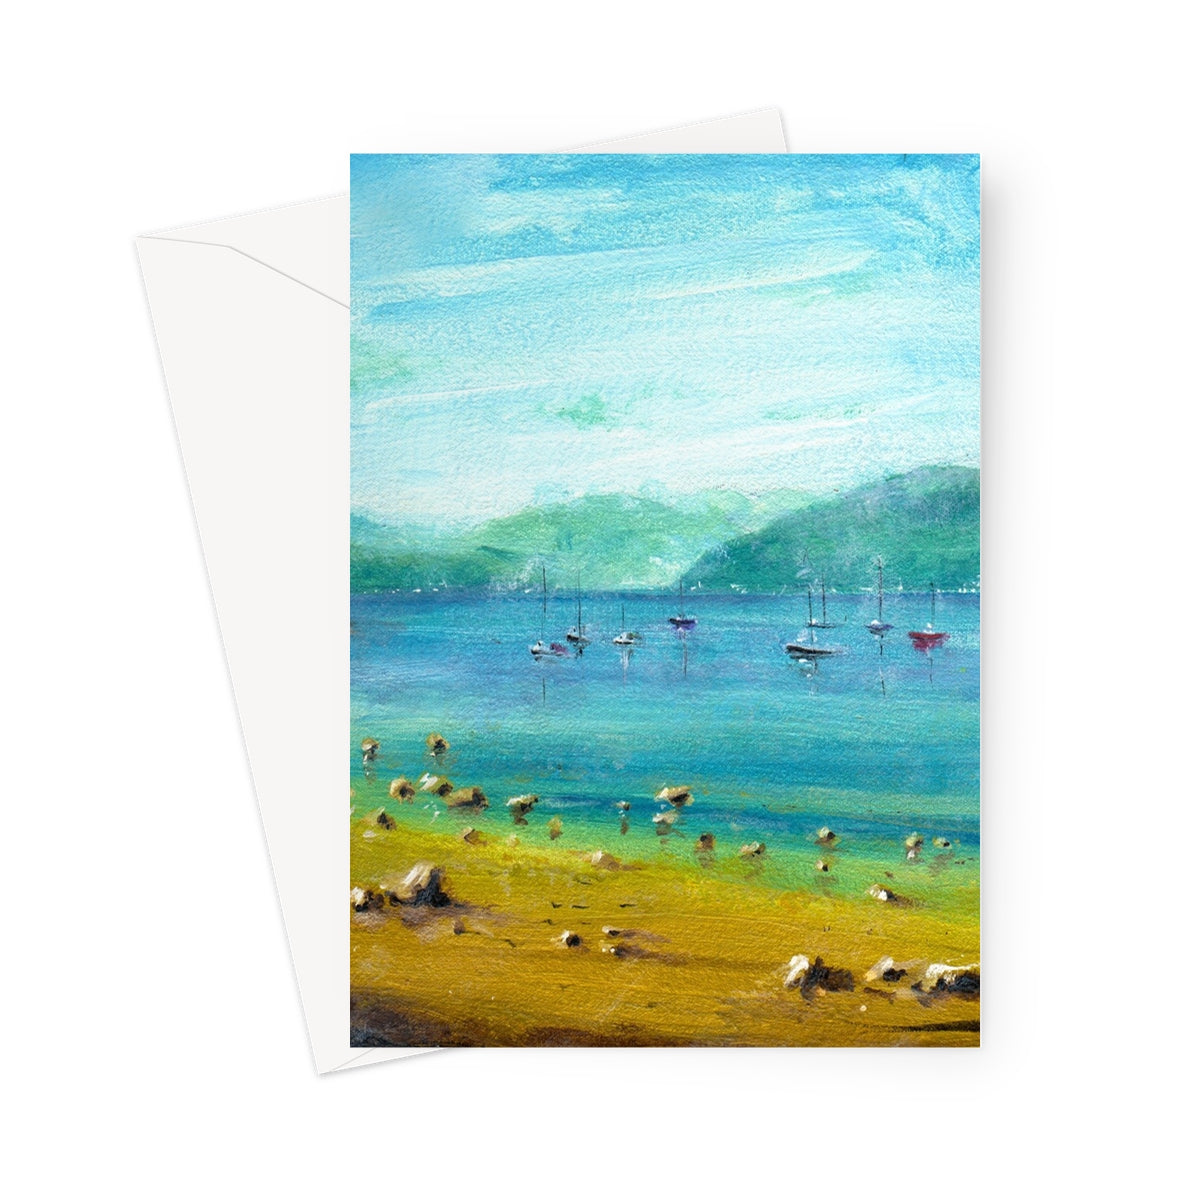 A Clyde Summer Day Art Gifts Greeting Card